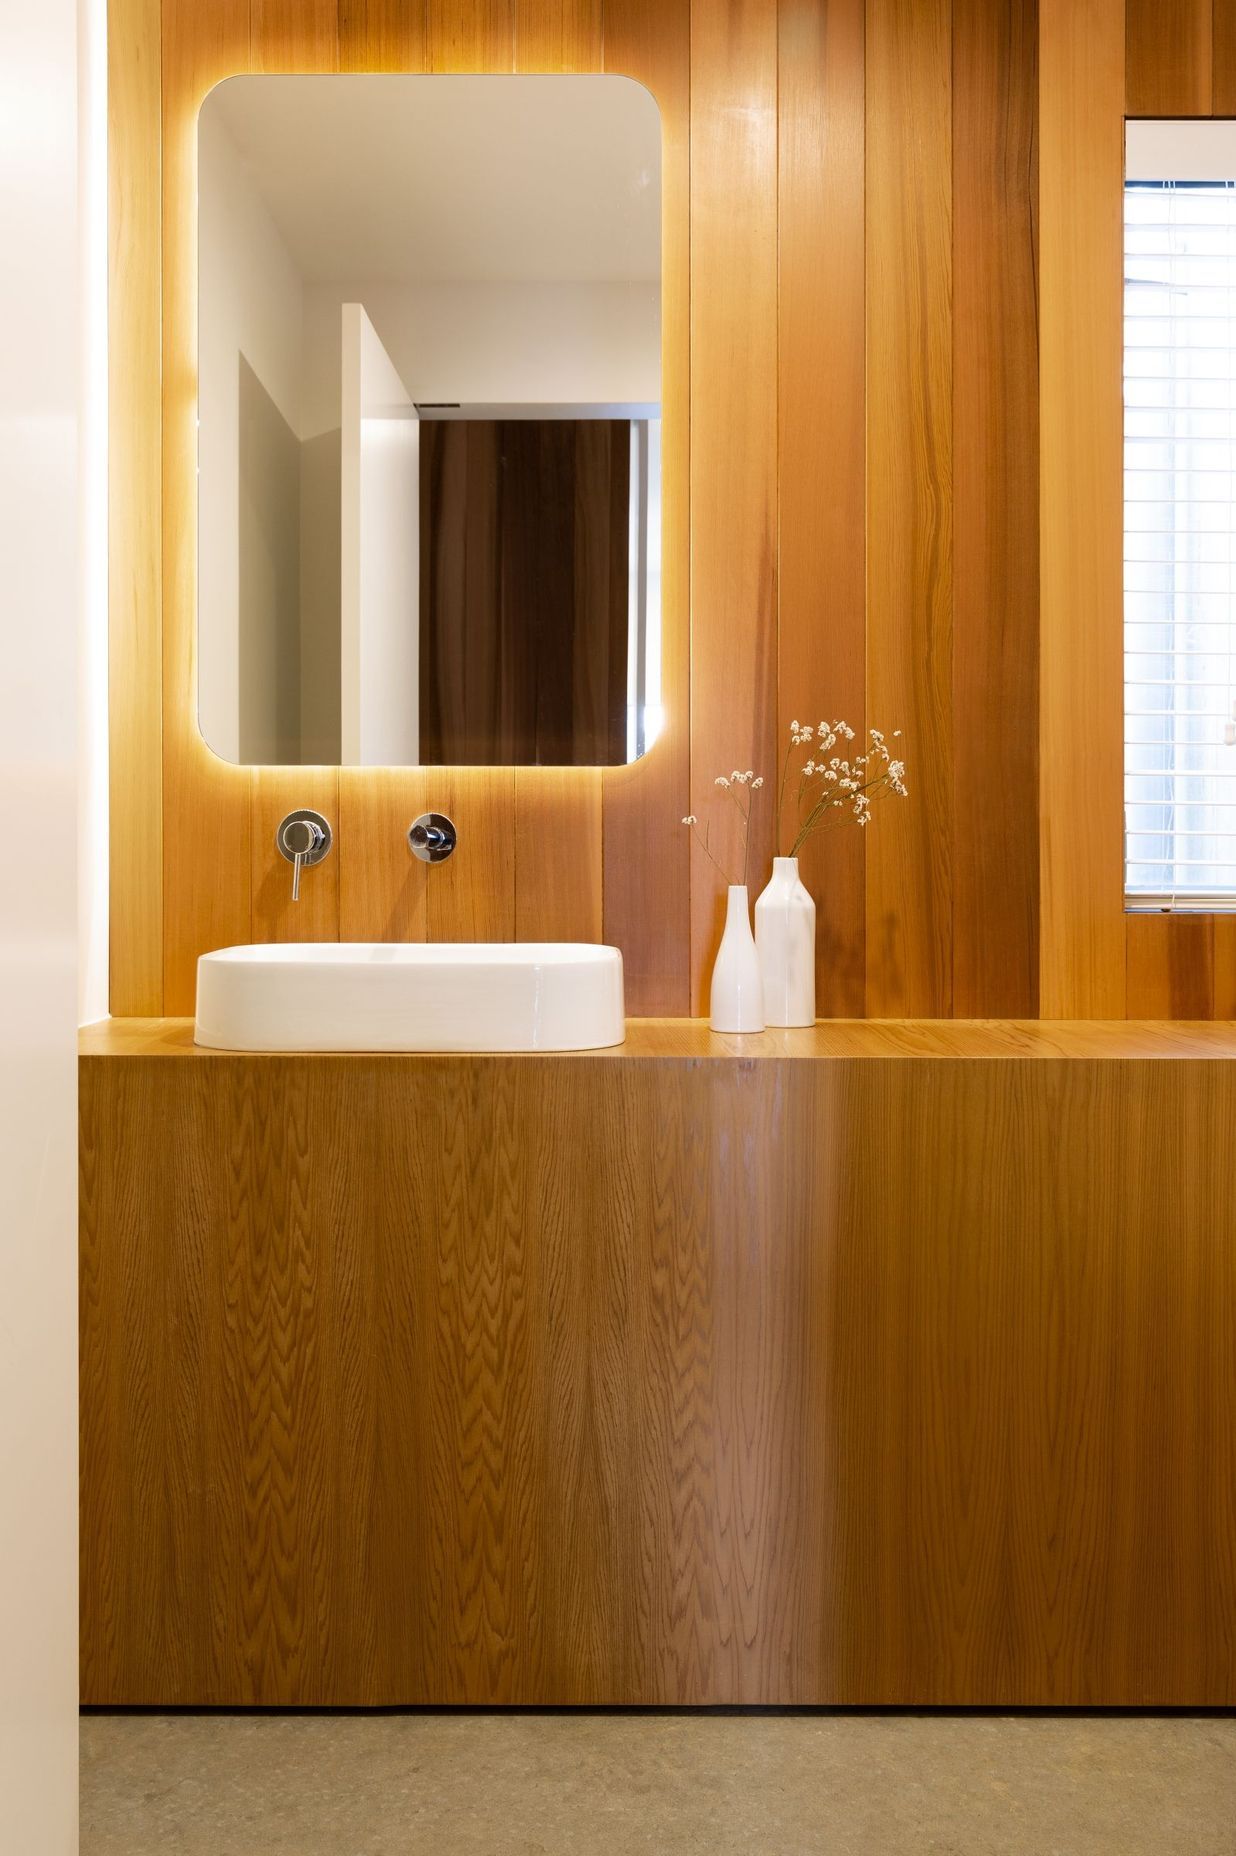 A wall of built-in timber cabinetry and panelling creates a graceful bathroom.